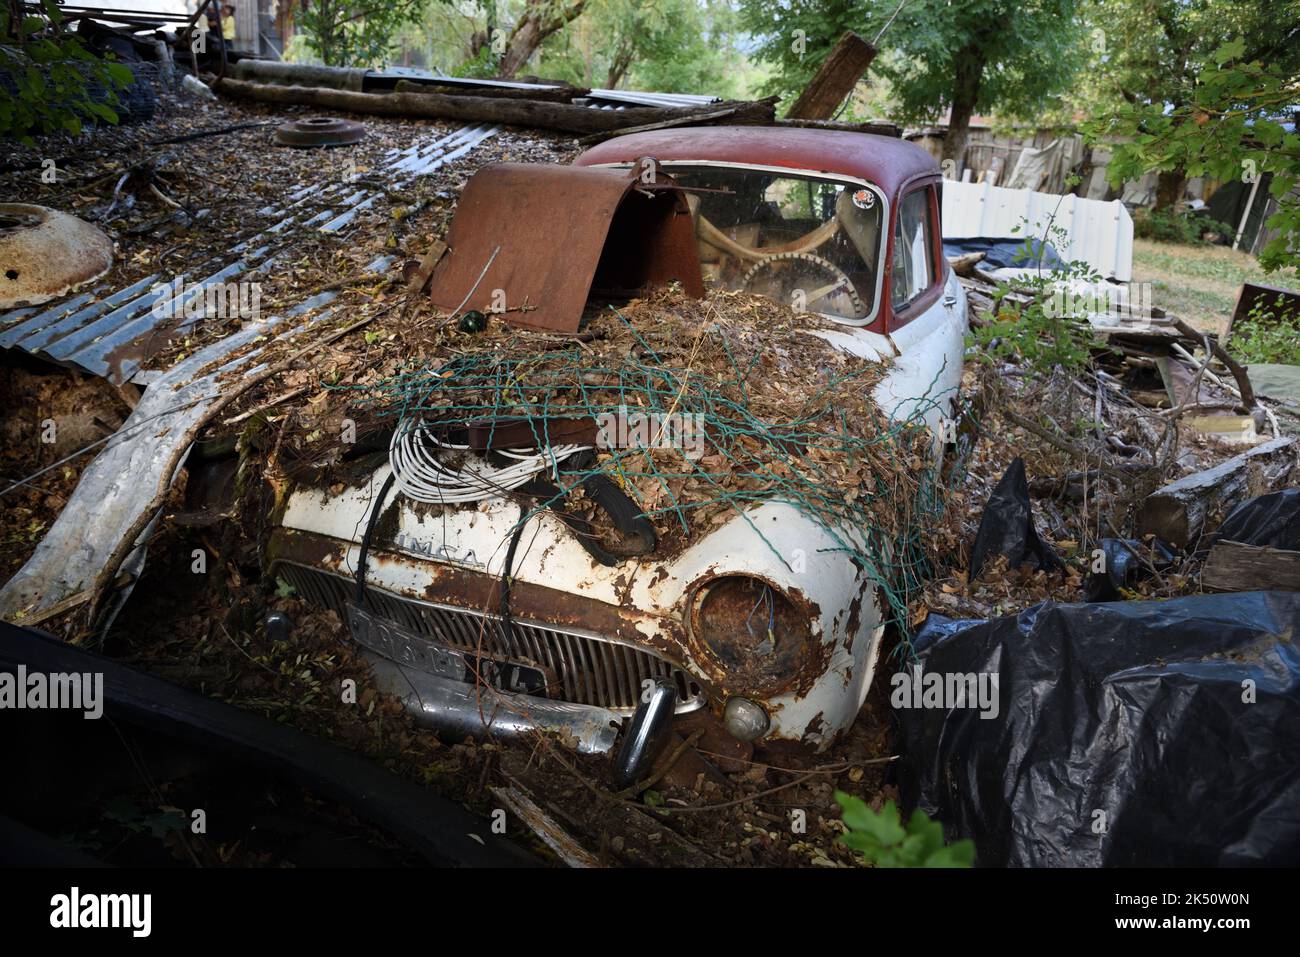 Rusty Old Car Wreck or Derelict Car Simca Aronde P60 Chatelaine Estate Car in Abandoned Farm Yard Stock Photo